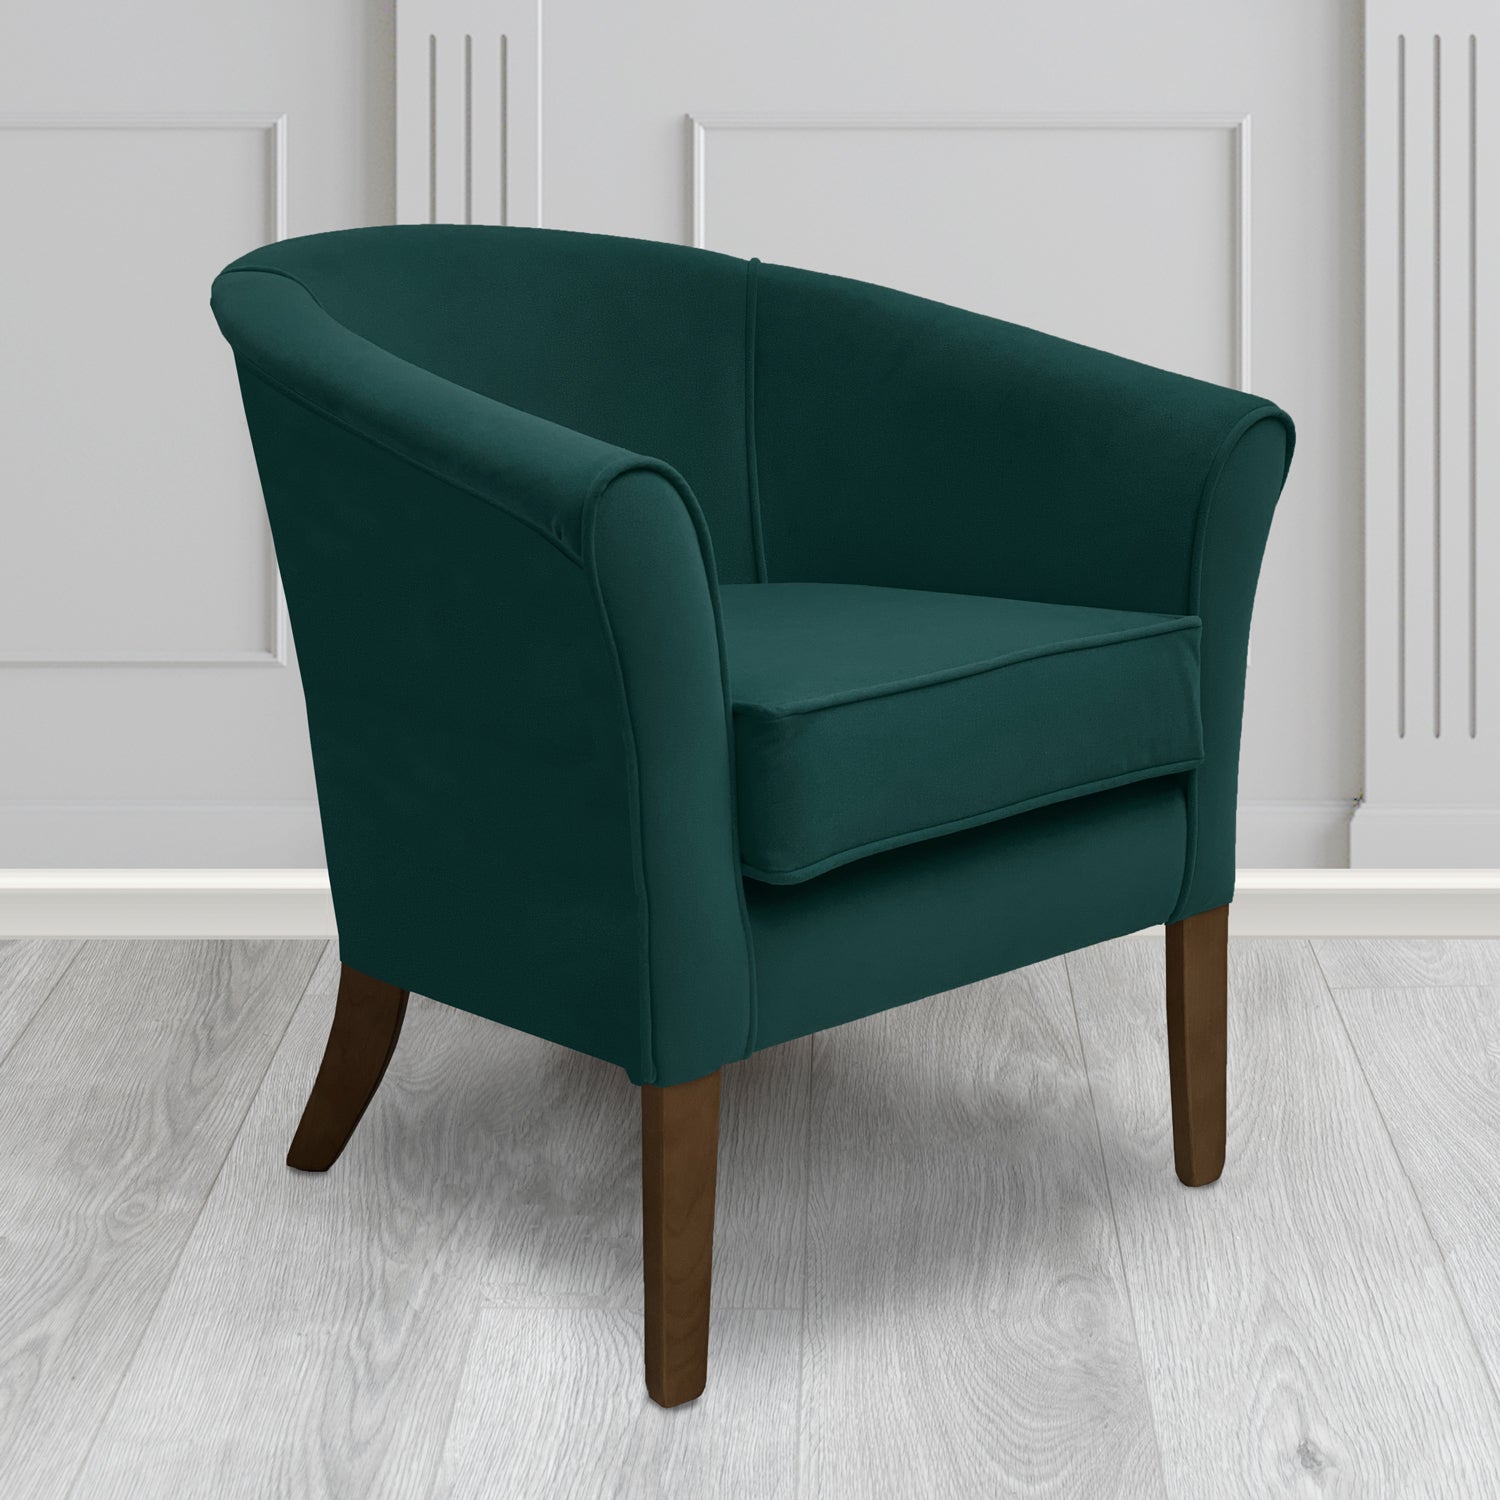 Aspen Tub Chair in Noble 203 Emerald Crib 5 Velvet Fabric - Water Resistant - The Tub Chair Shop